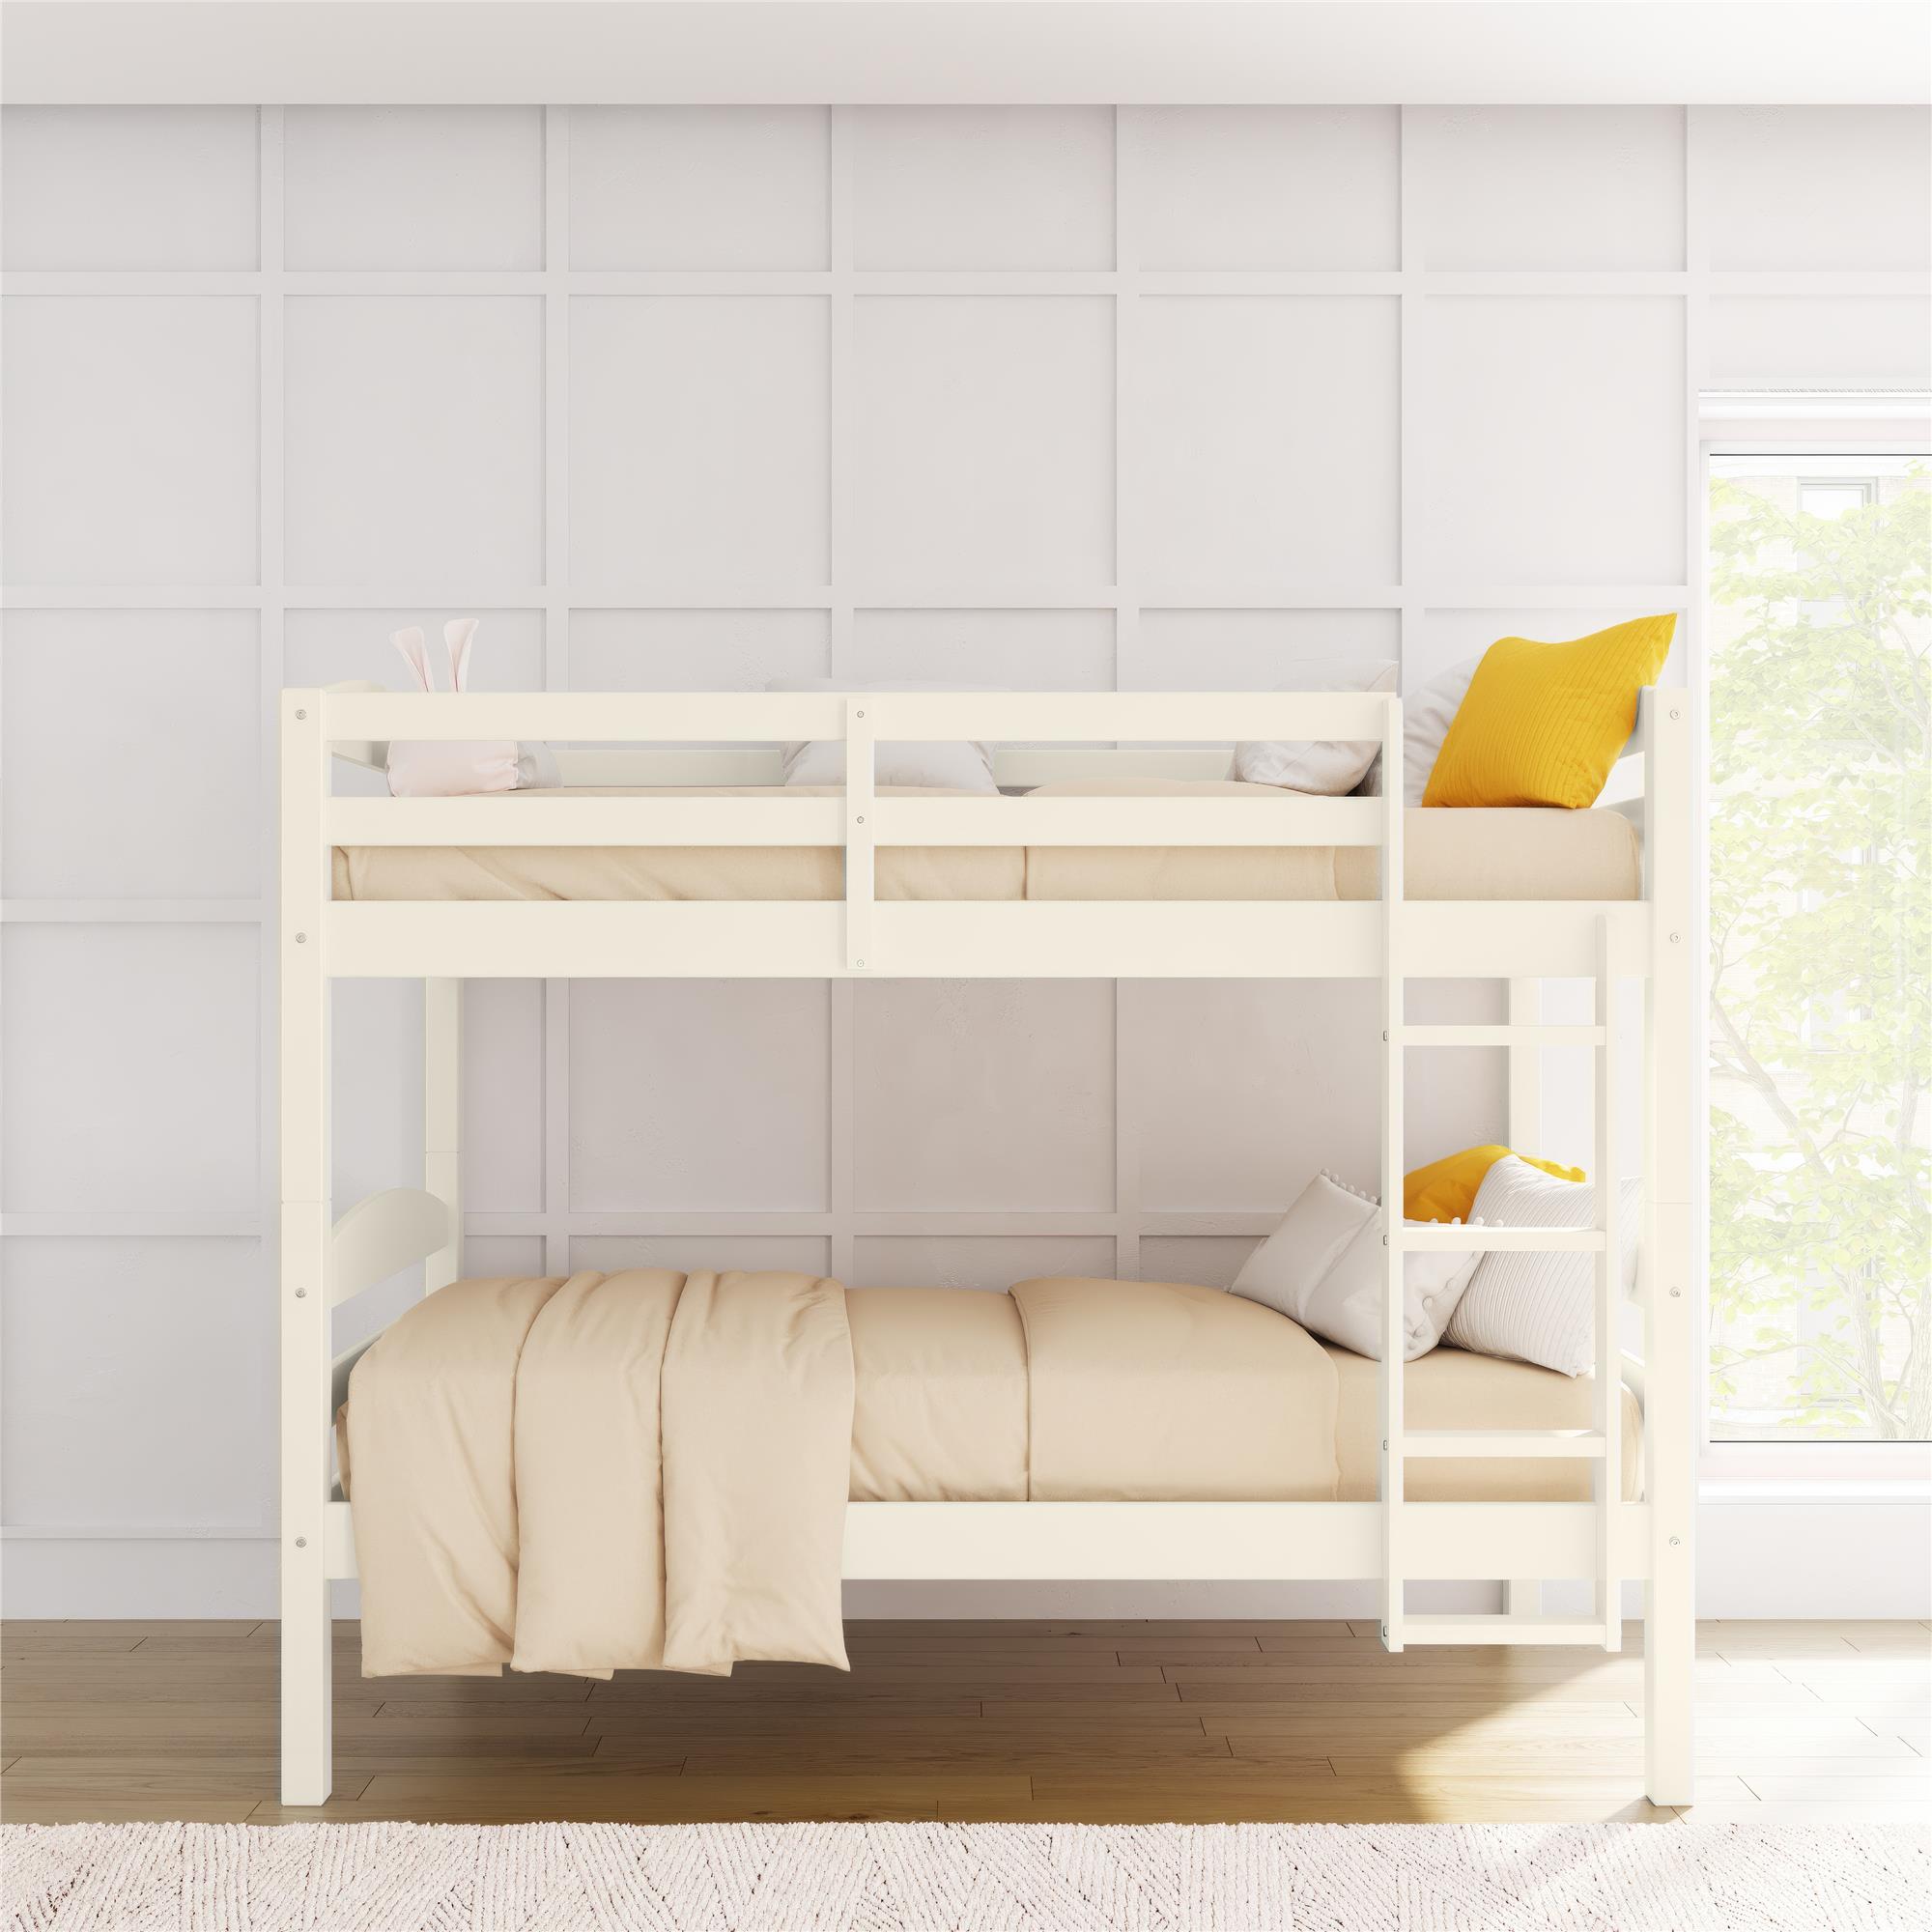 Better Homes & Gardens Leighton Solid Wood Twin-over-Twin Convertible Bunk Bed, White - image 3 of 24